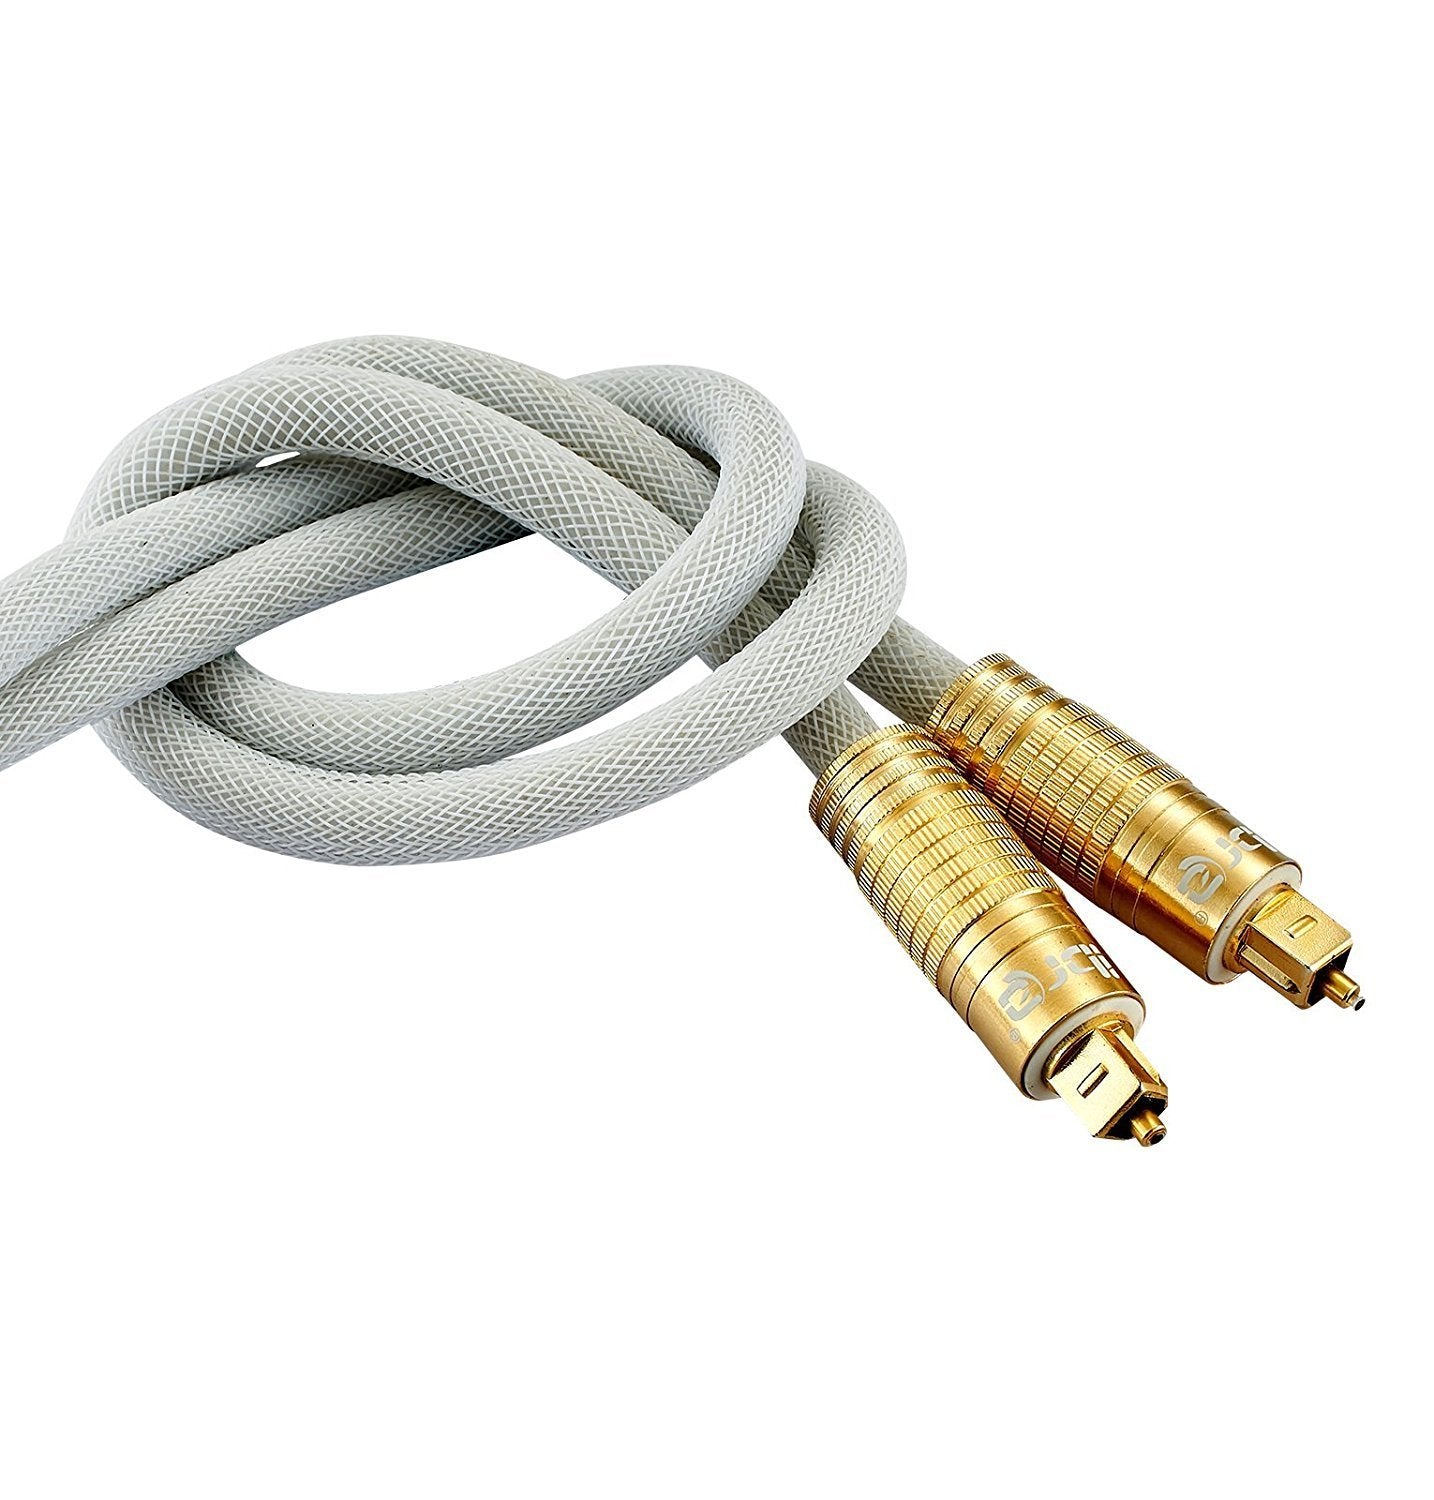 Optical Toslink Digital Audio Cable - 24K Gold Casing - Suitable for PS3,Sky,Sky HD,LCD,LED,Plasma, Blu Ray to Connect with Home Cinema Systems,AV Amps - 1M - IBRA PREMIUM WHITE